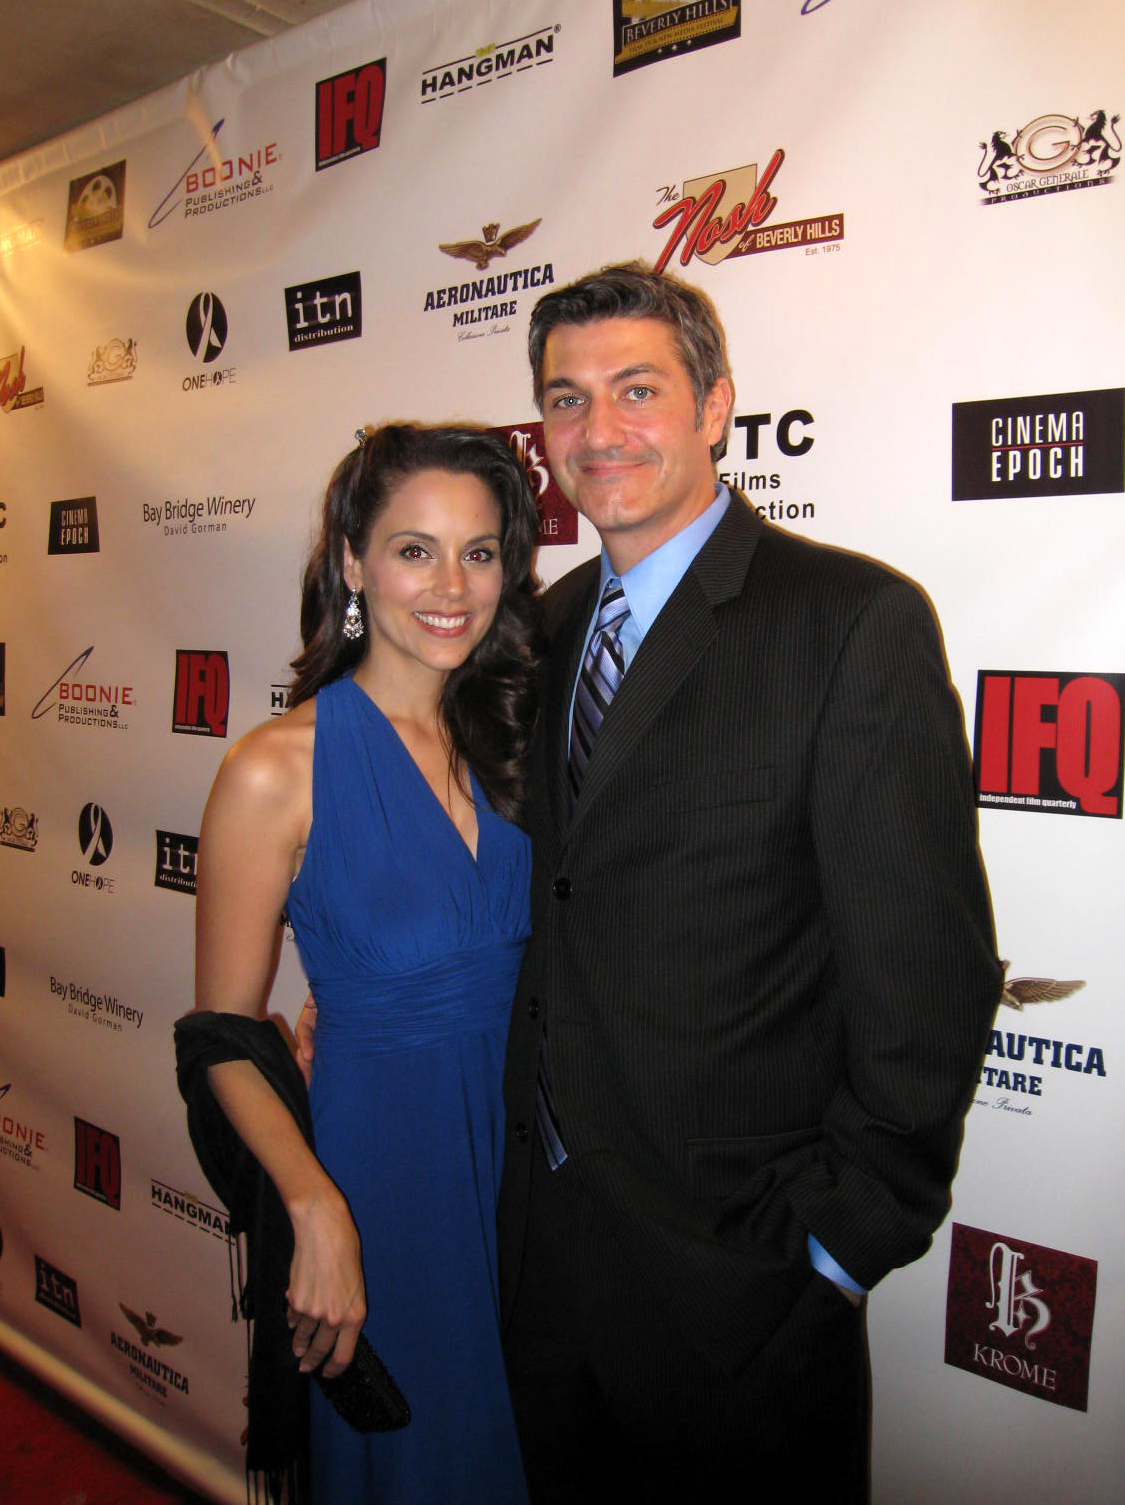 P.J. Marino with actress Tessa Munro on the red carpet at the Beverly Hills Film, TV & New Media Festival 2010.